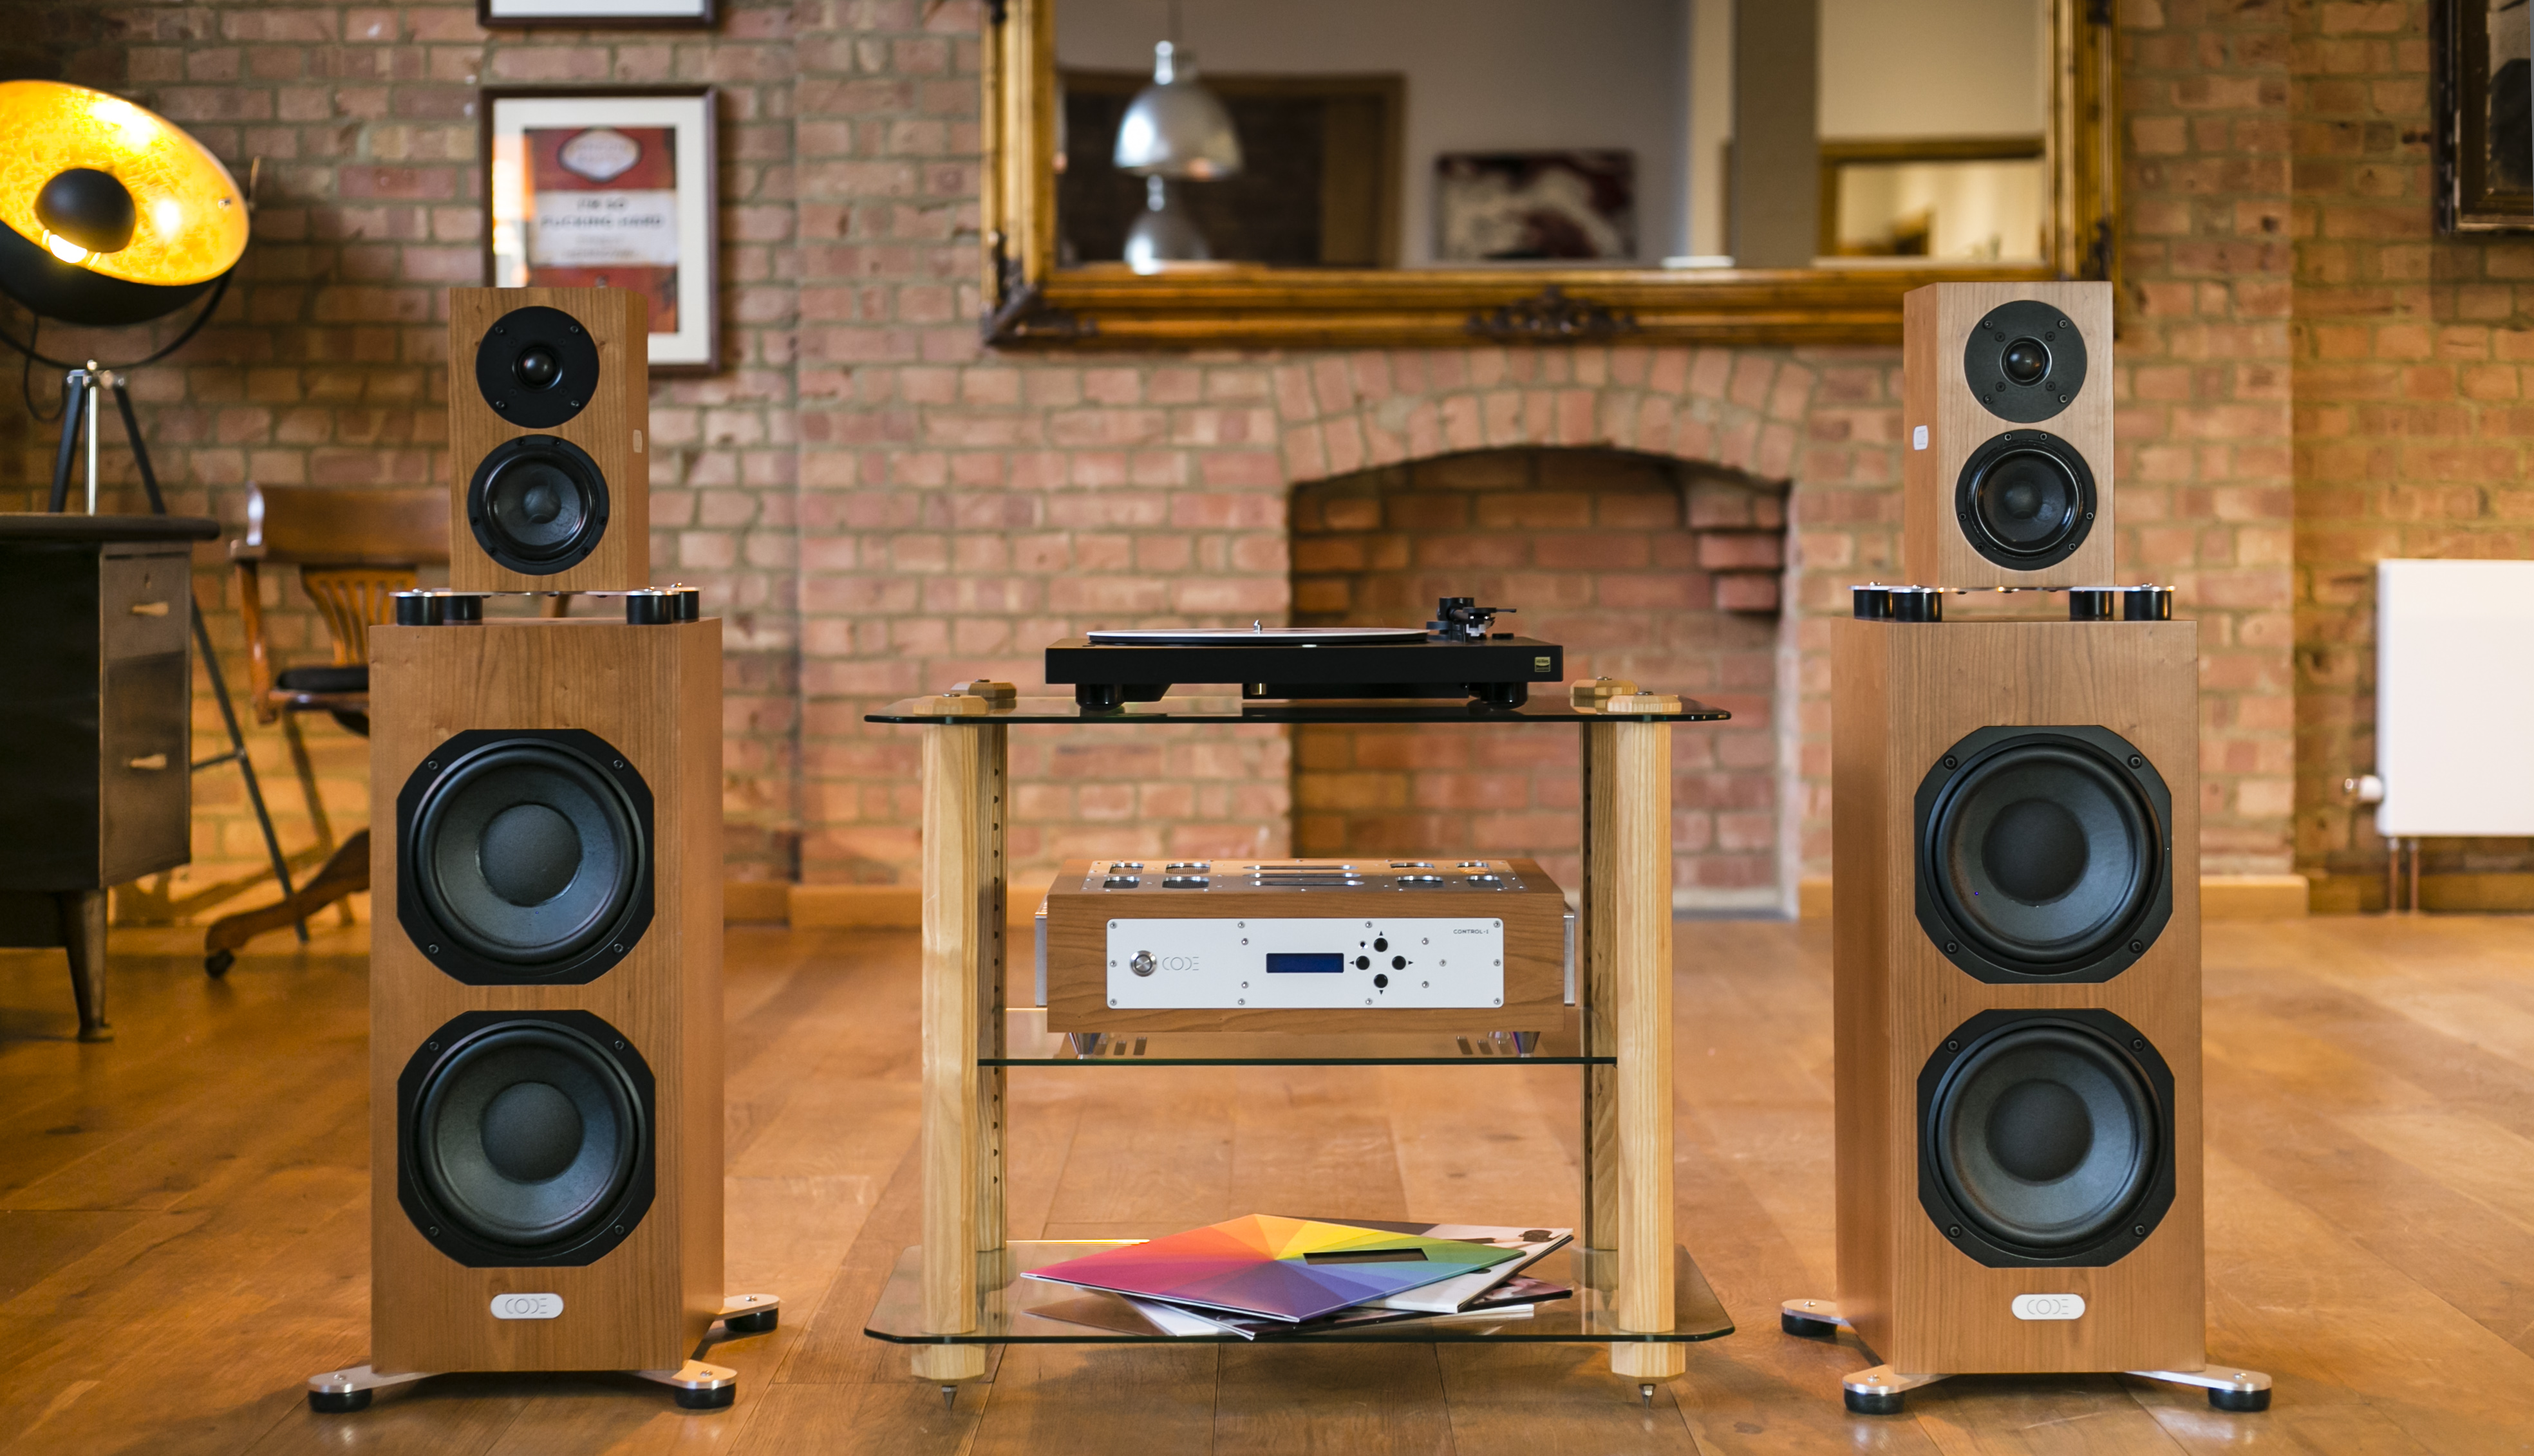 CODE ACOUSTICS: An independent British Hi-fi company specialising in active loudspeakers. Ph_0934